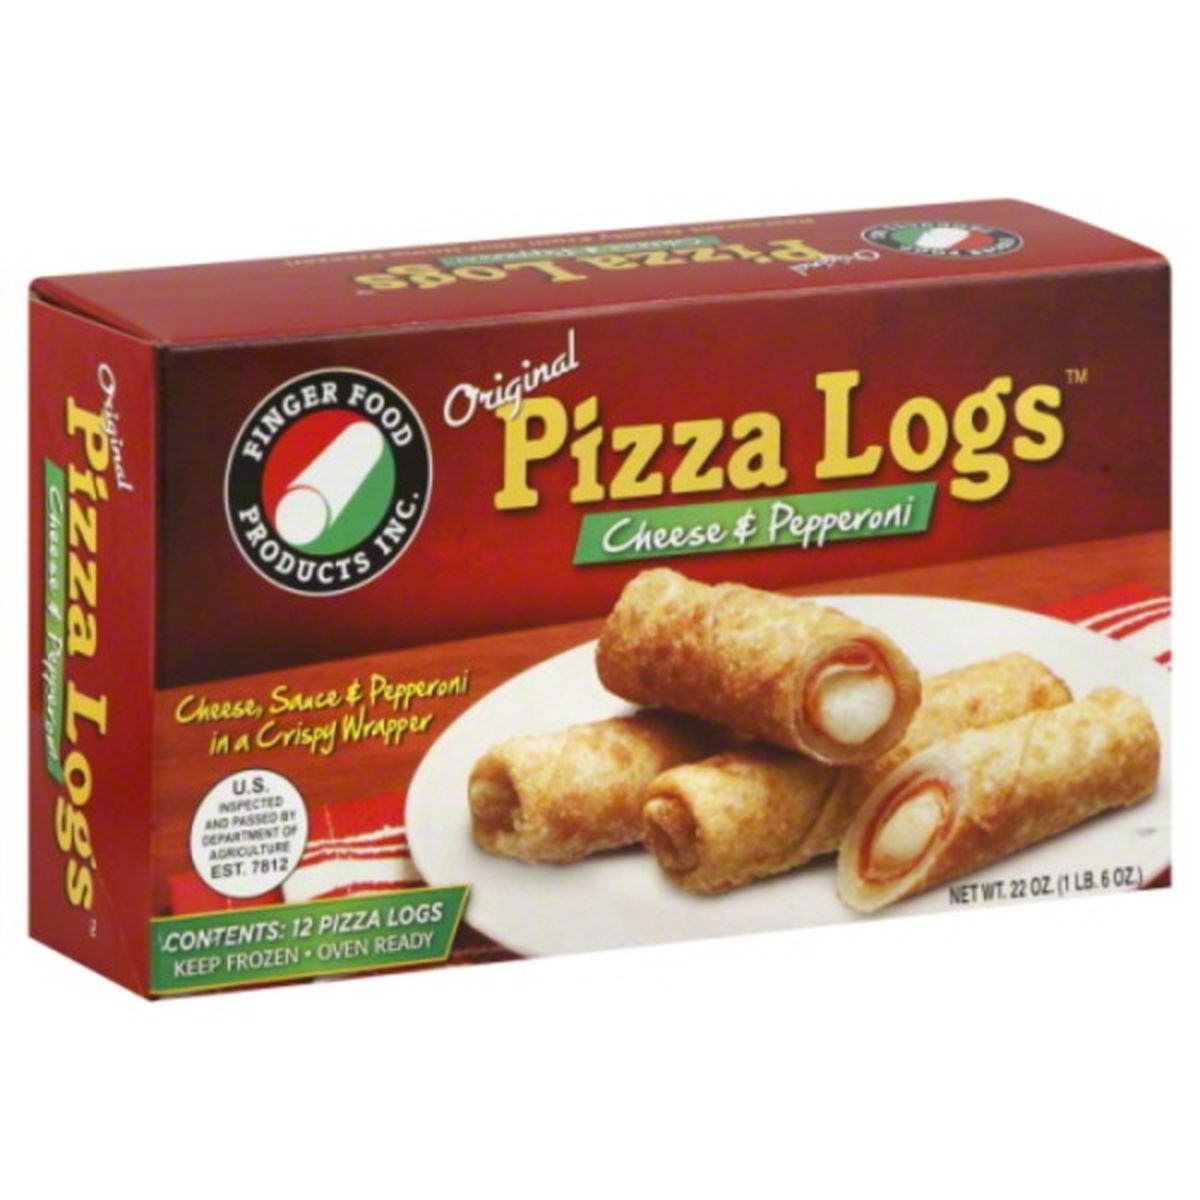 Calories in Finger Food Products Pizza Logs, Original, Cheese & Pepperoni